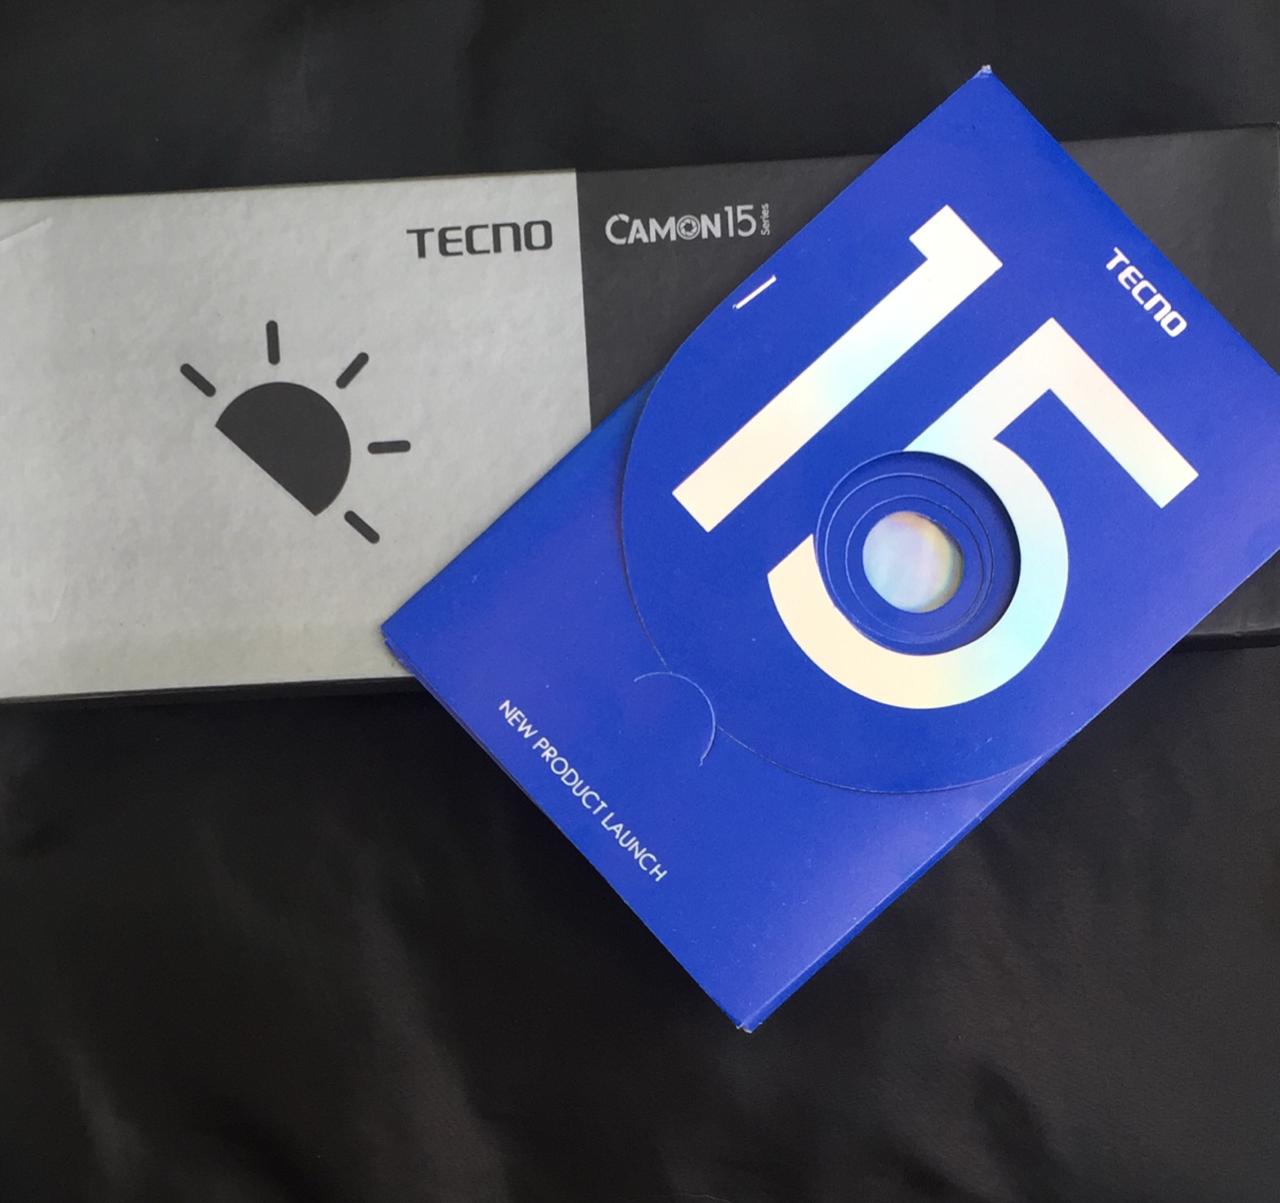 Catch us live on TECNO Camon 15 launch event